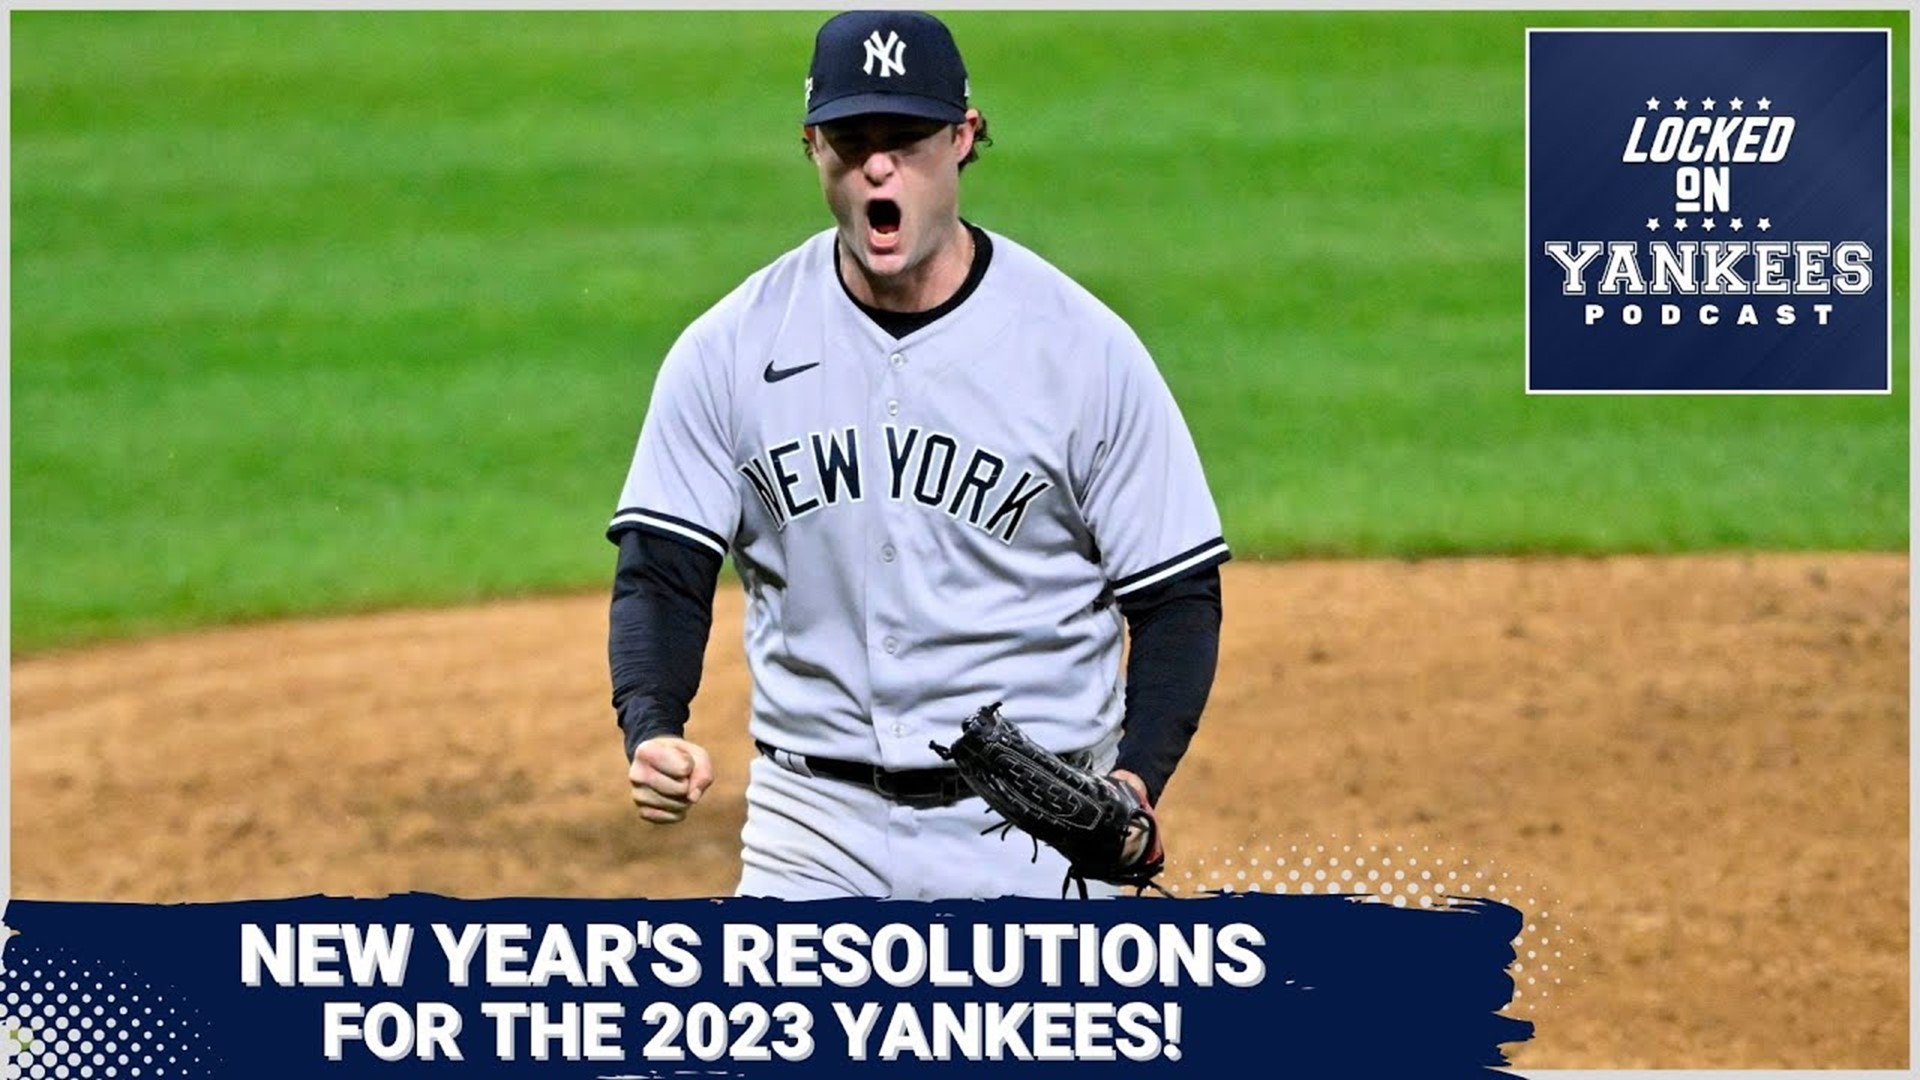 Happy New Year! It's resolution time, and Stacey has come up with some for most of the Yankees players, their manager, and the team as a whole.